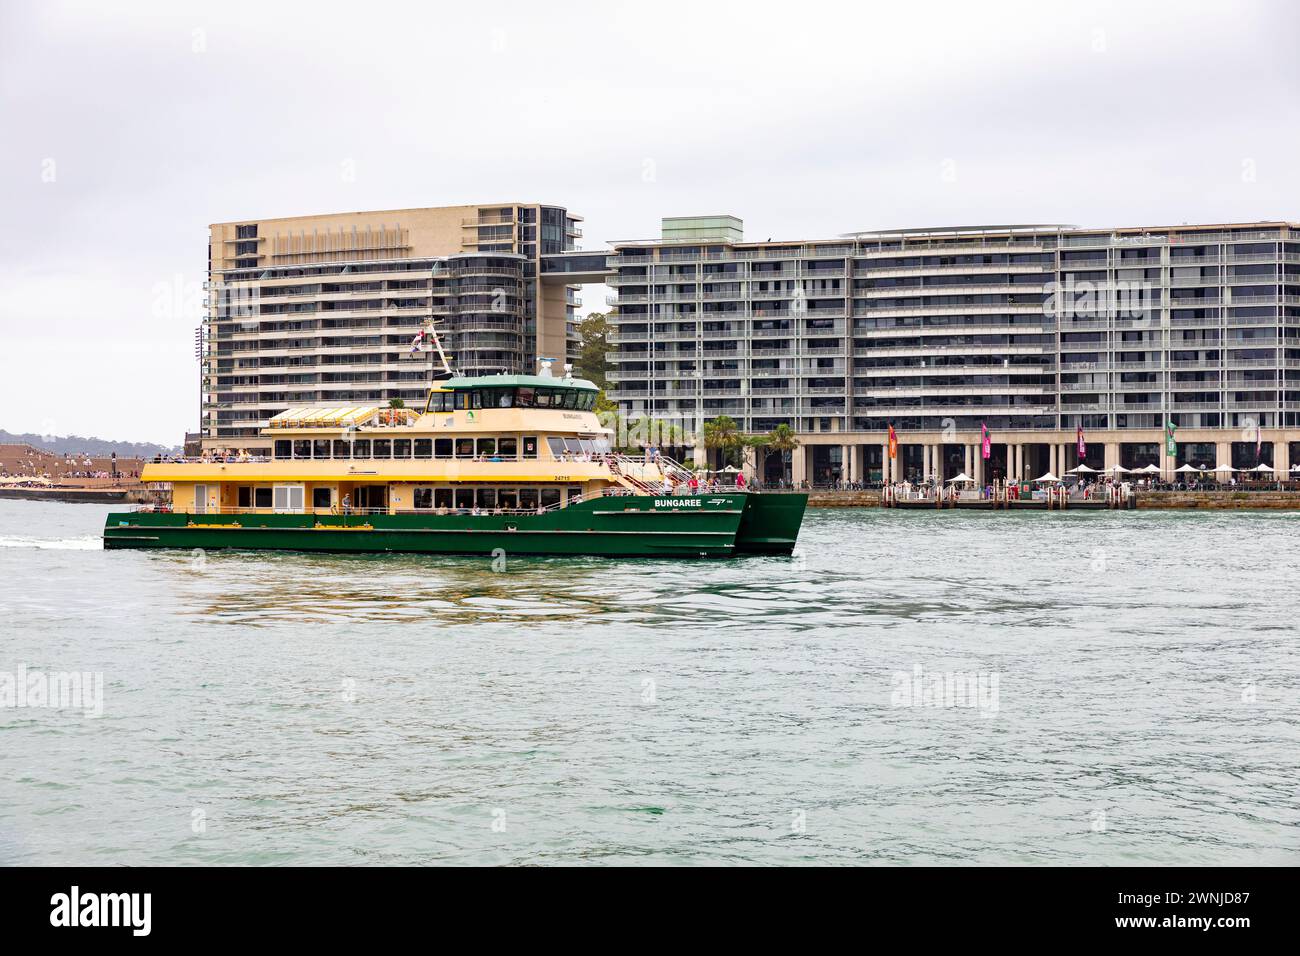 Sydney emerald class ferry the MV Bungaree passes the toaster residential building and Bennelong Apartments east circular quay,Sydney,NSW,Australia, Stock Photo